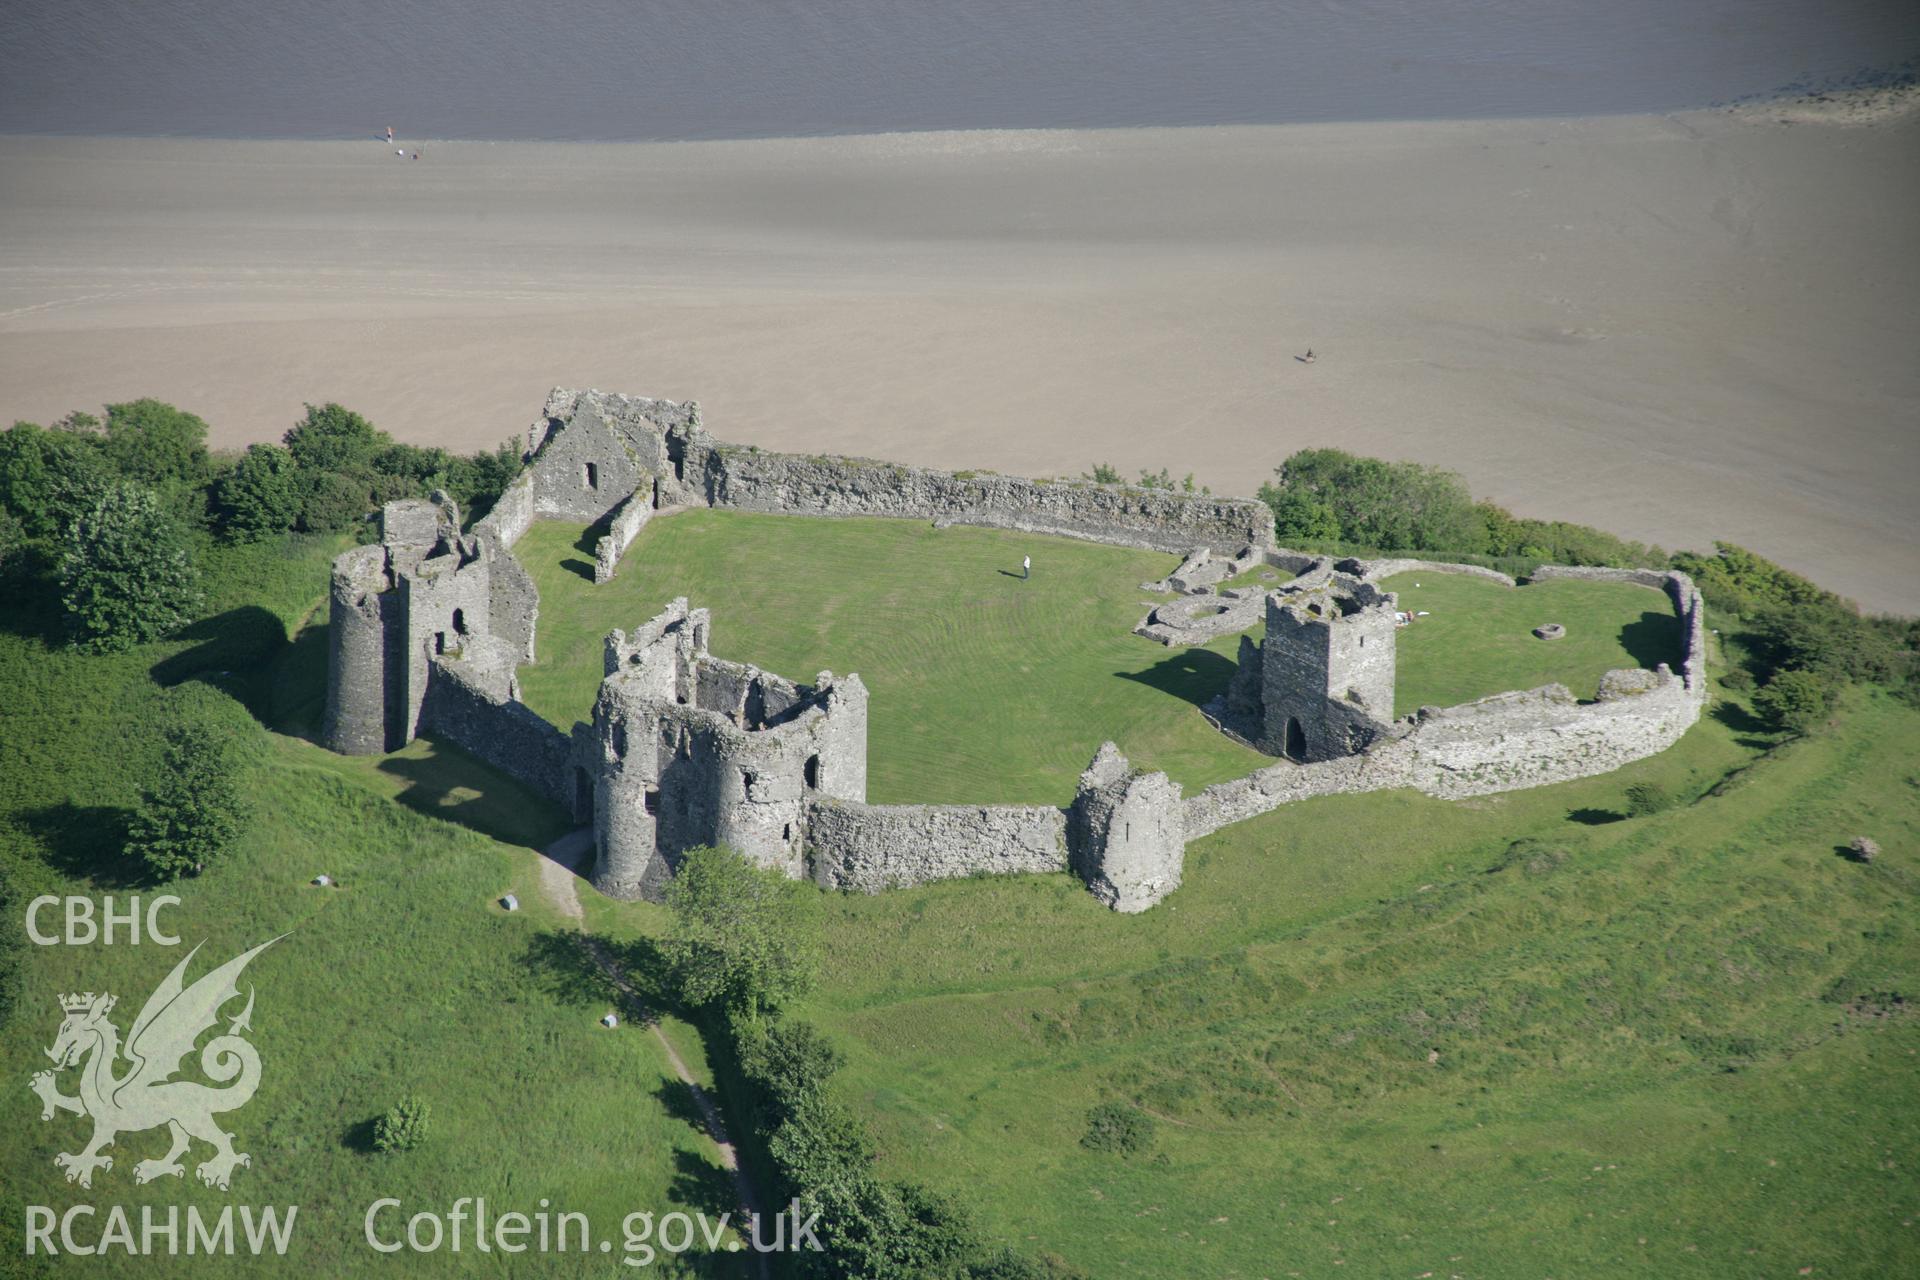 RCAHMW colour oblique aerial photograph of Llanstephan Castle, viewed from the north. Taken on 09 June 2005 by Toby Driver